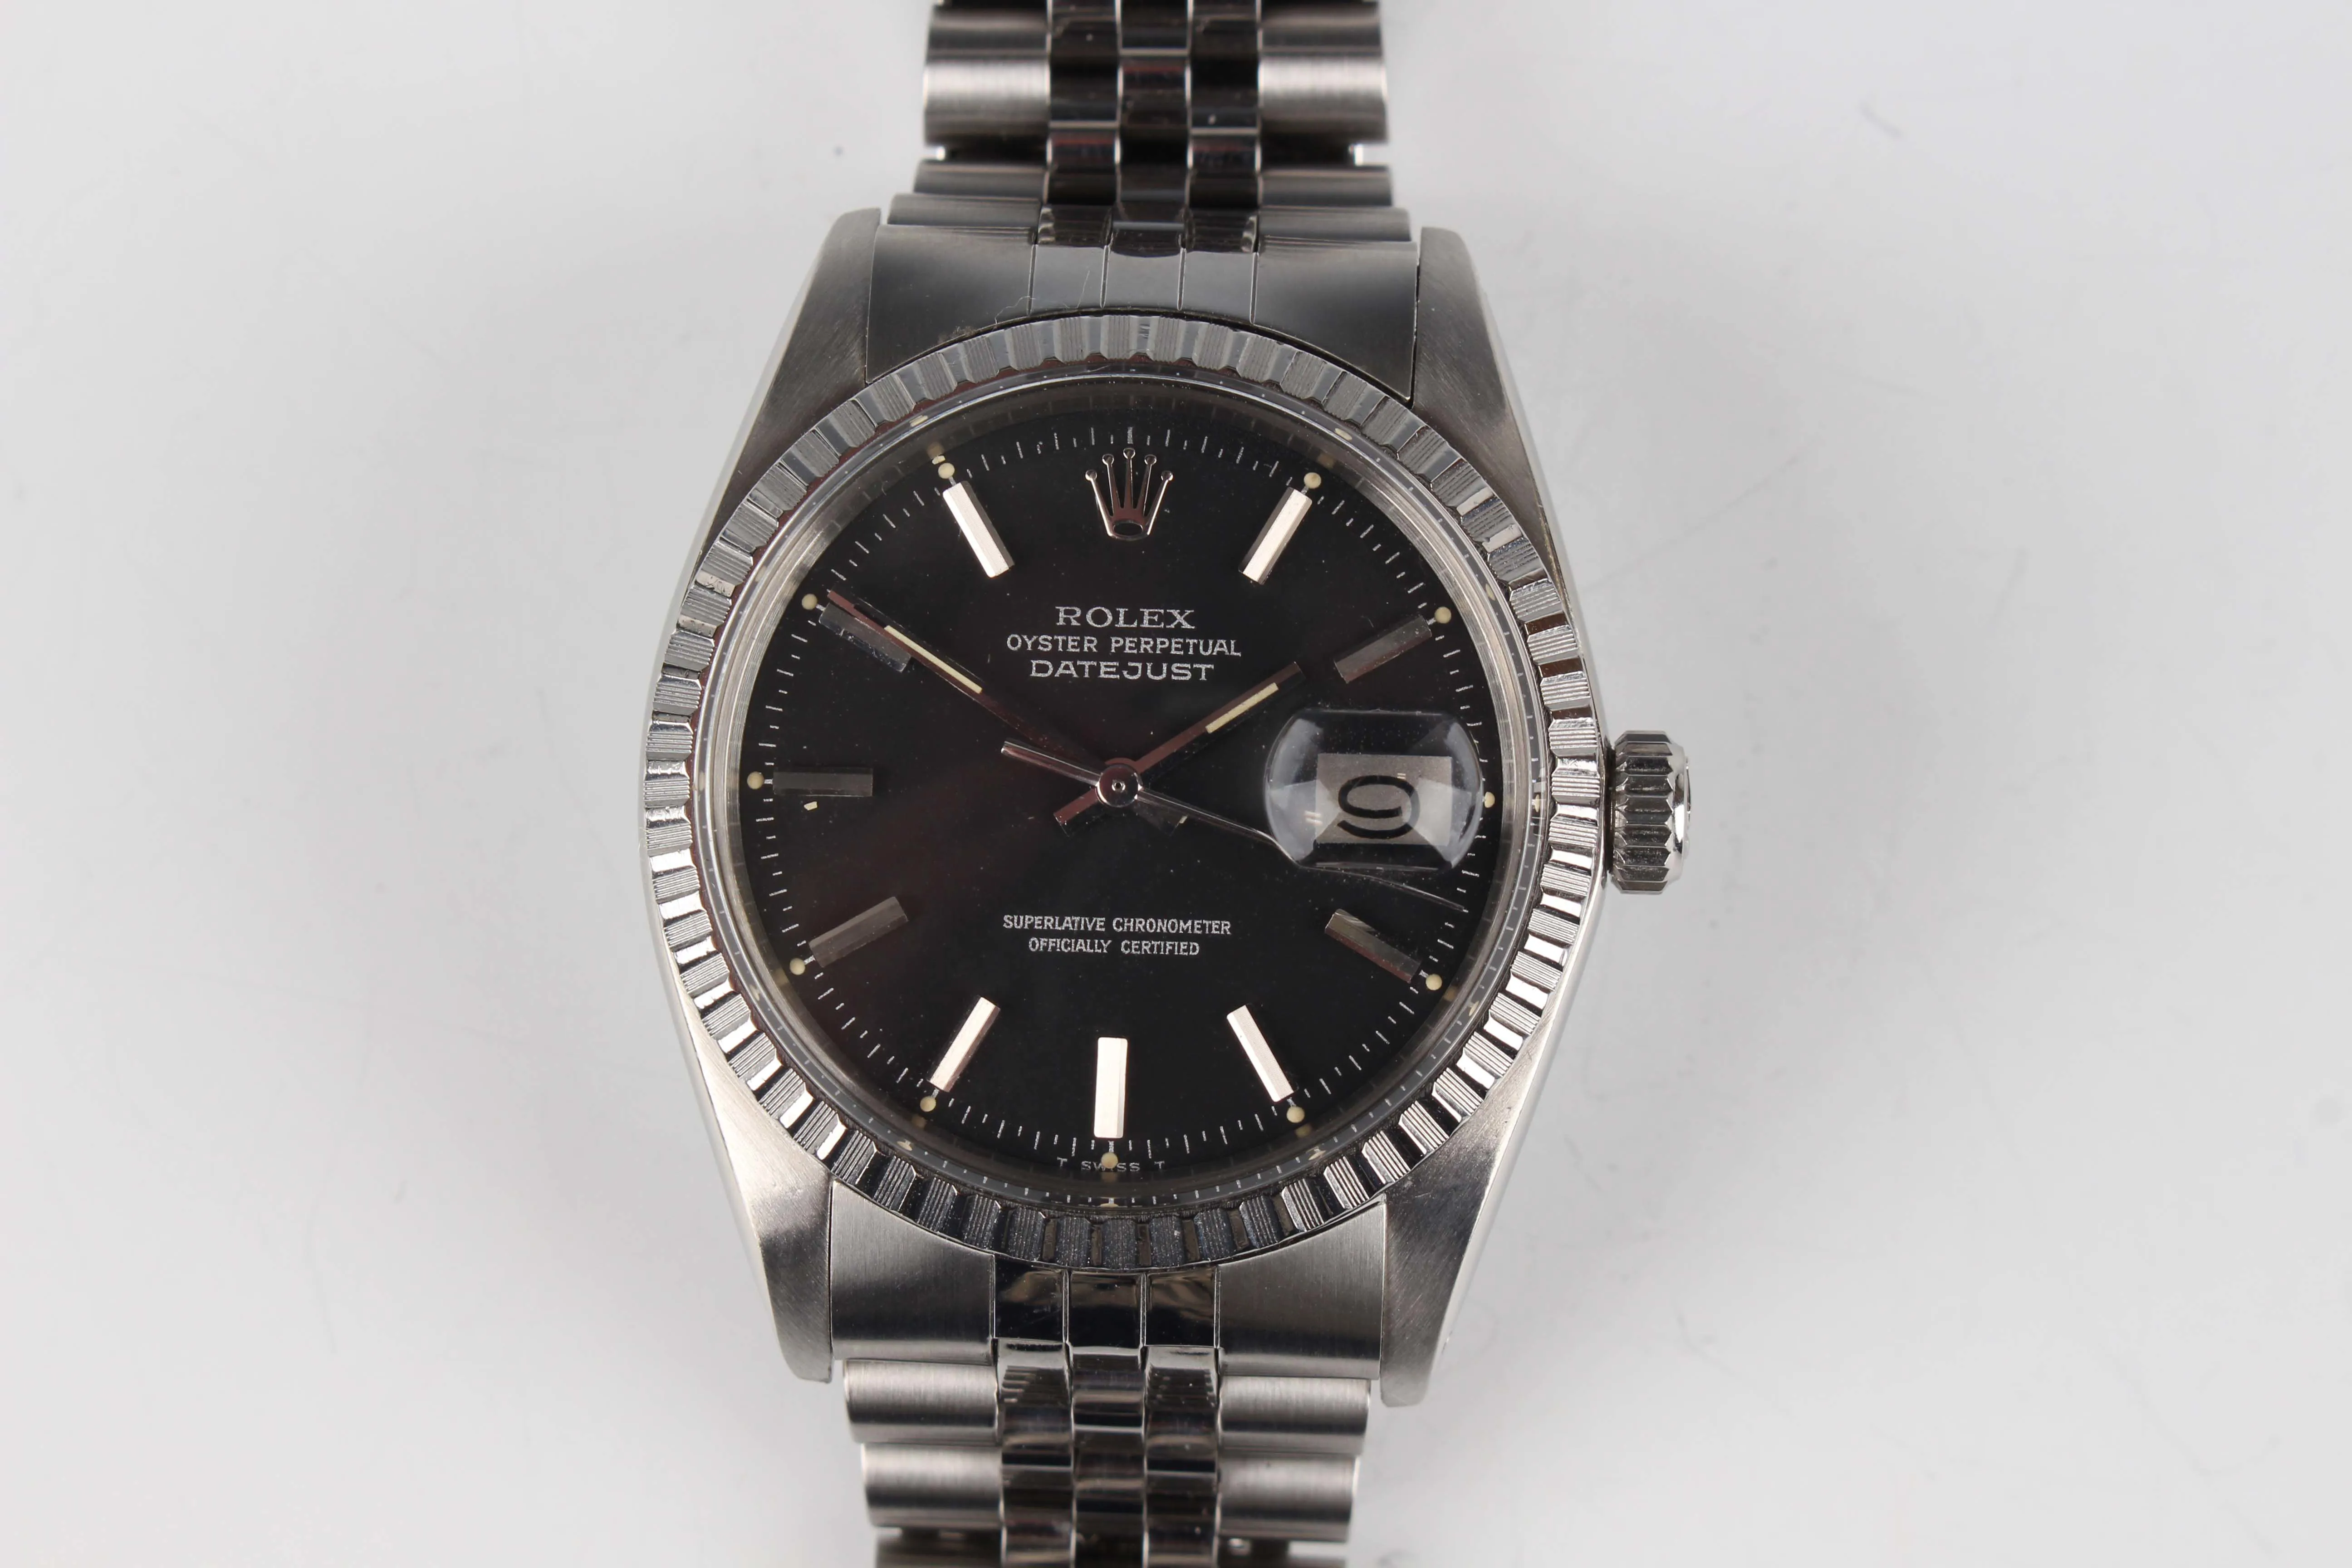 Rolex Oyster Perpetual "Datejust" 1603 35mm Stainless steel Black